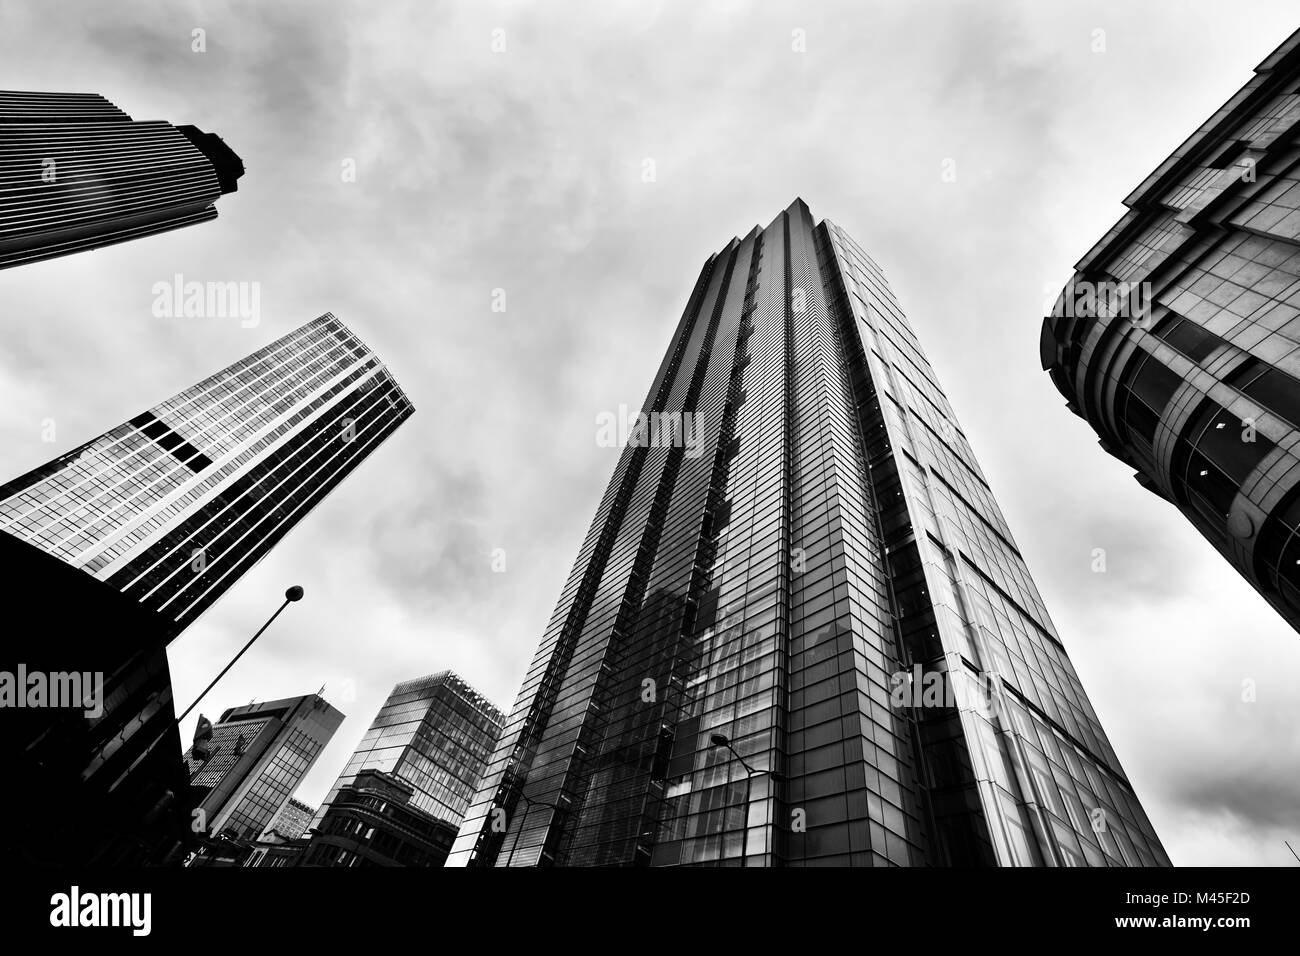 Business architecture, skyscrapers in London, the UK Stock Photo